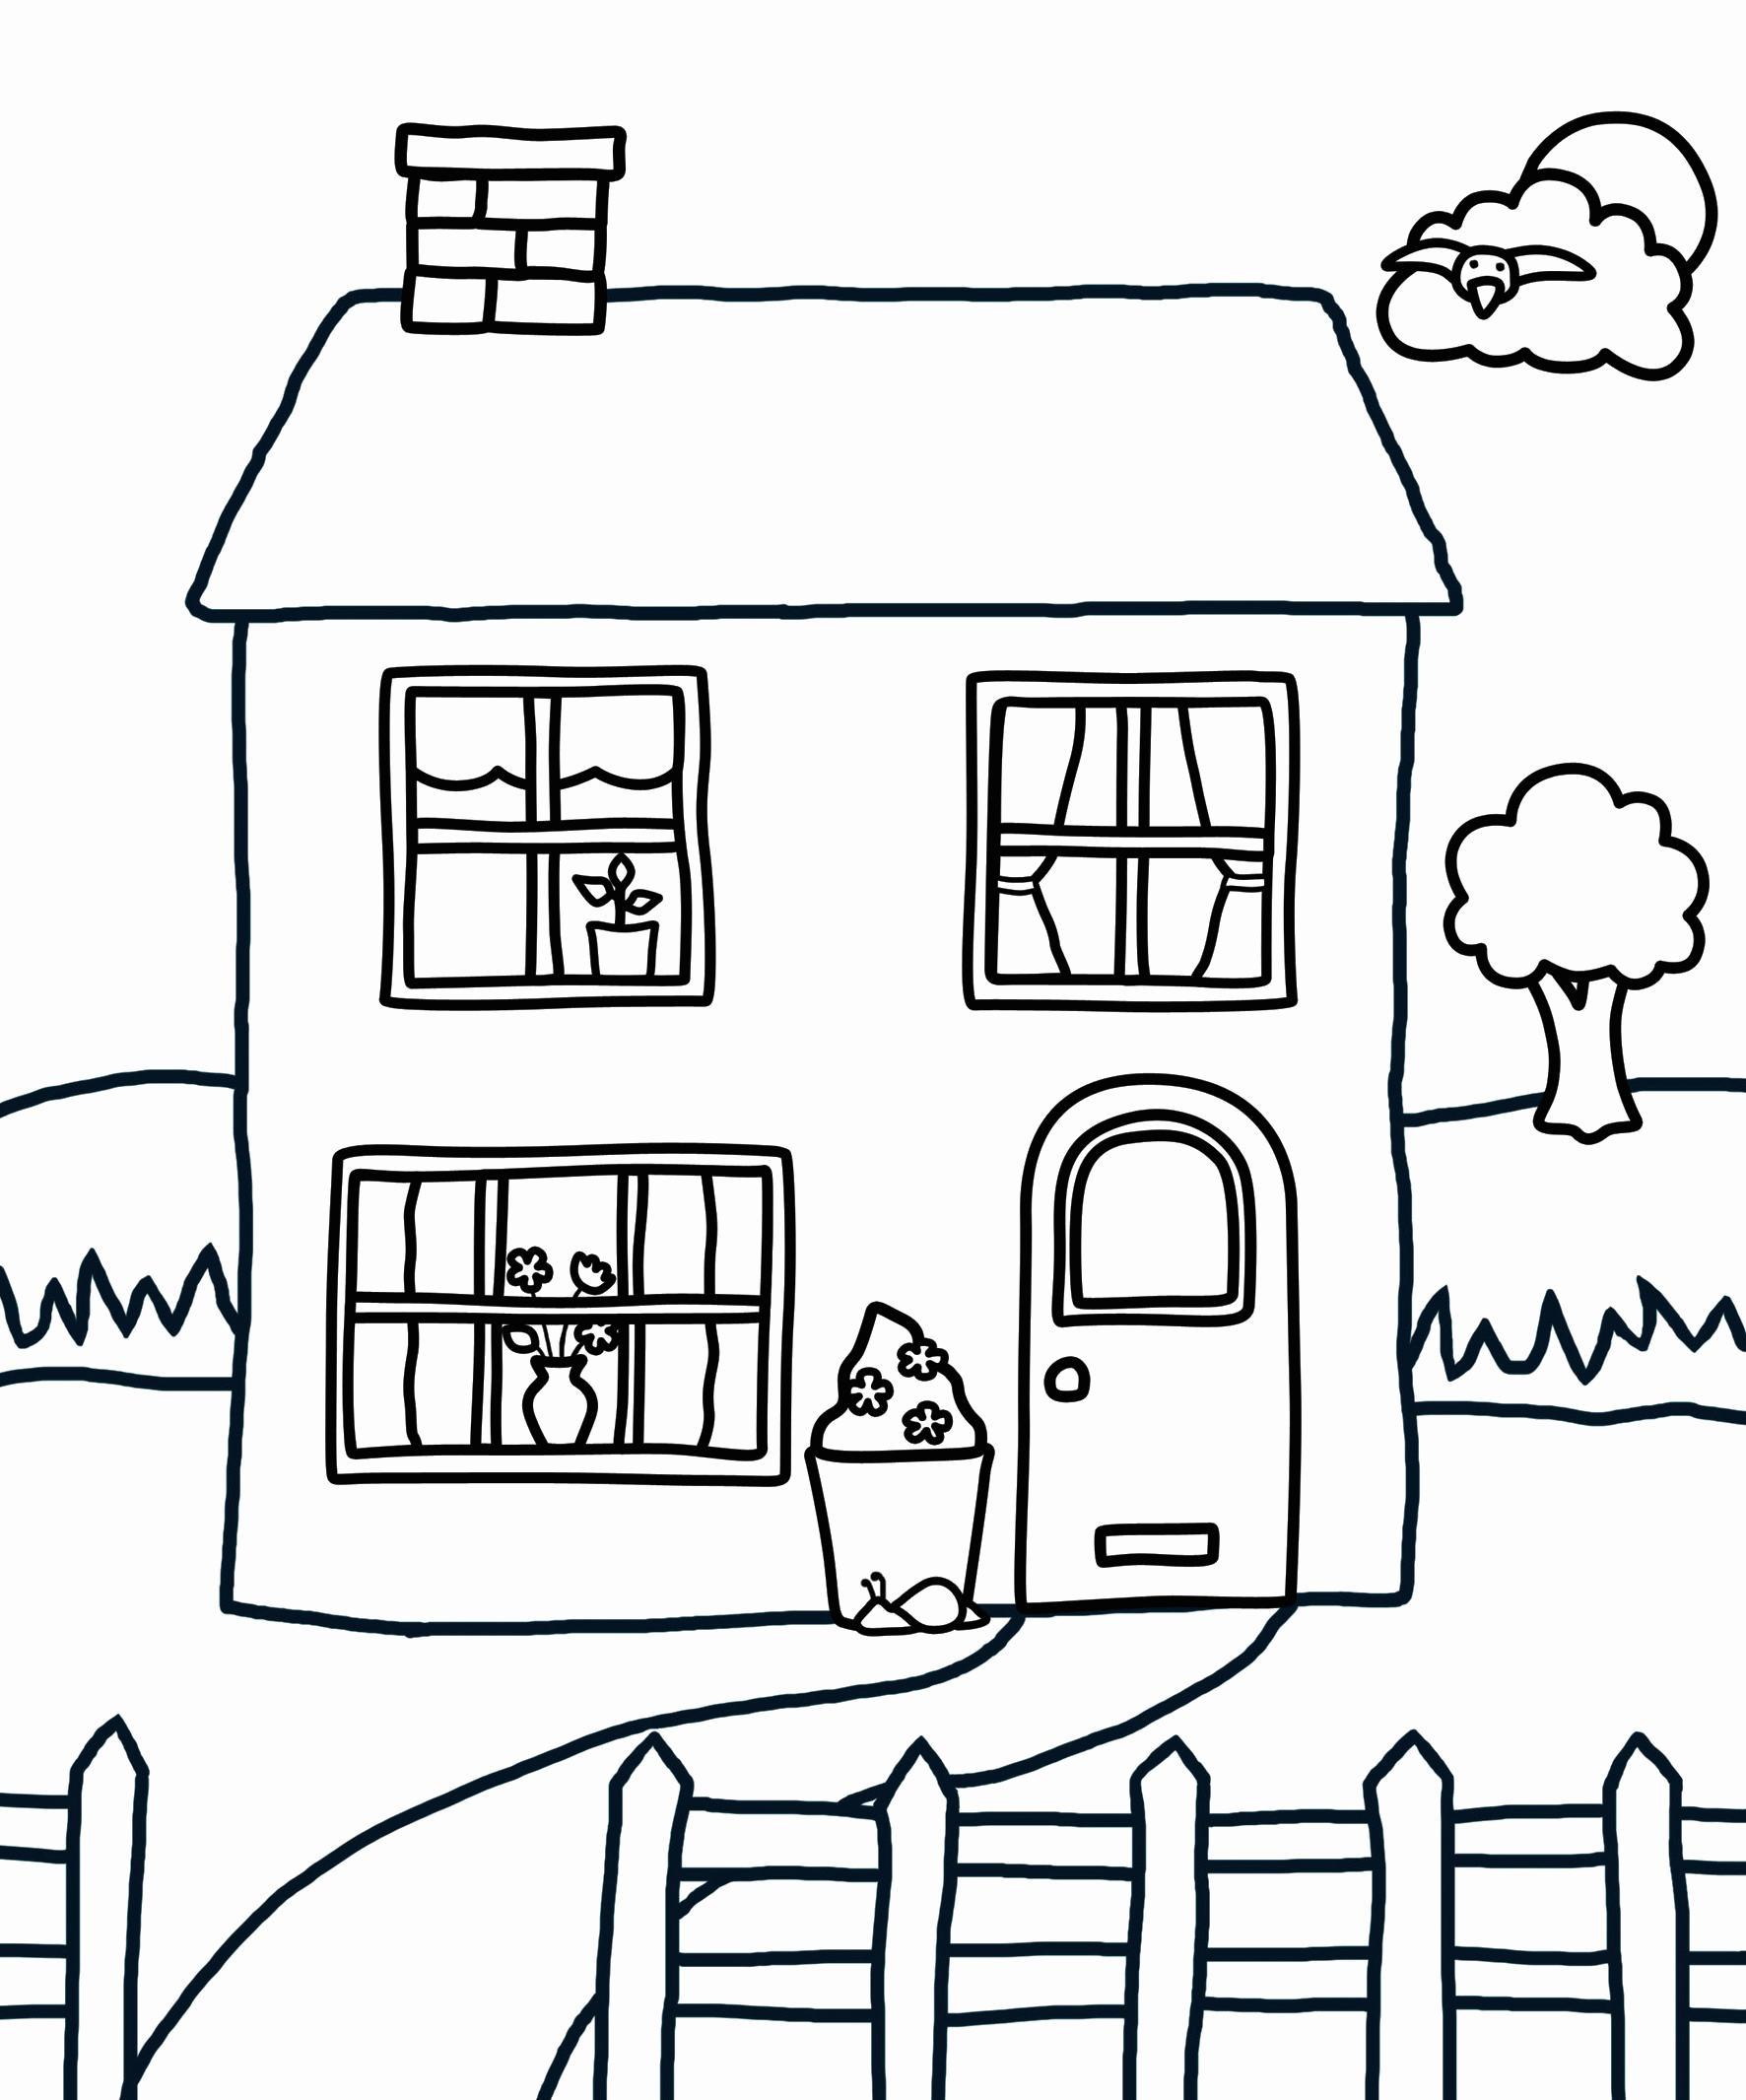 My House Coloring Pages For Kids #cyy : Printable Houses Coloring ...